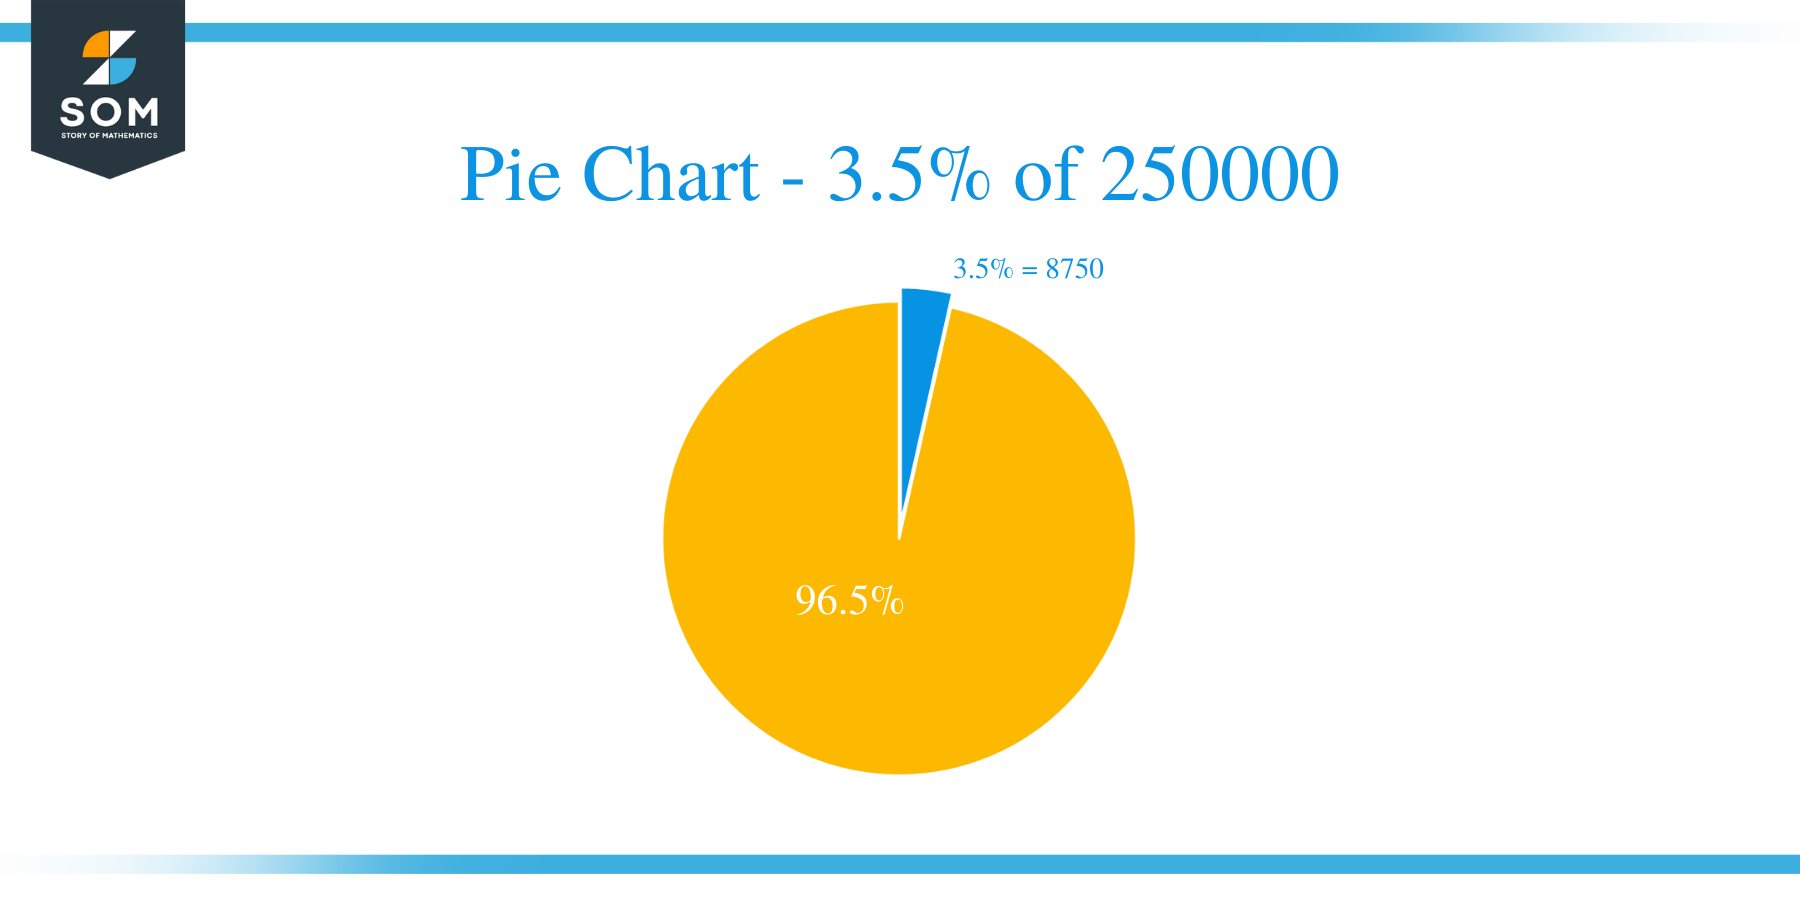 pie chart of 3.5 percent of 250000